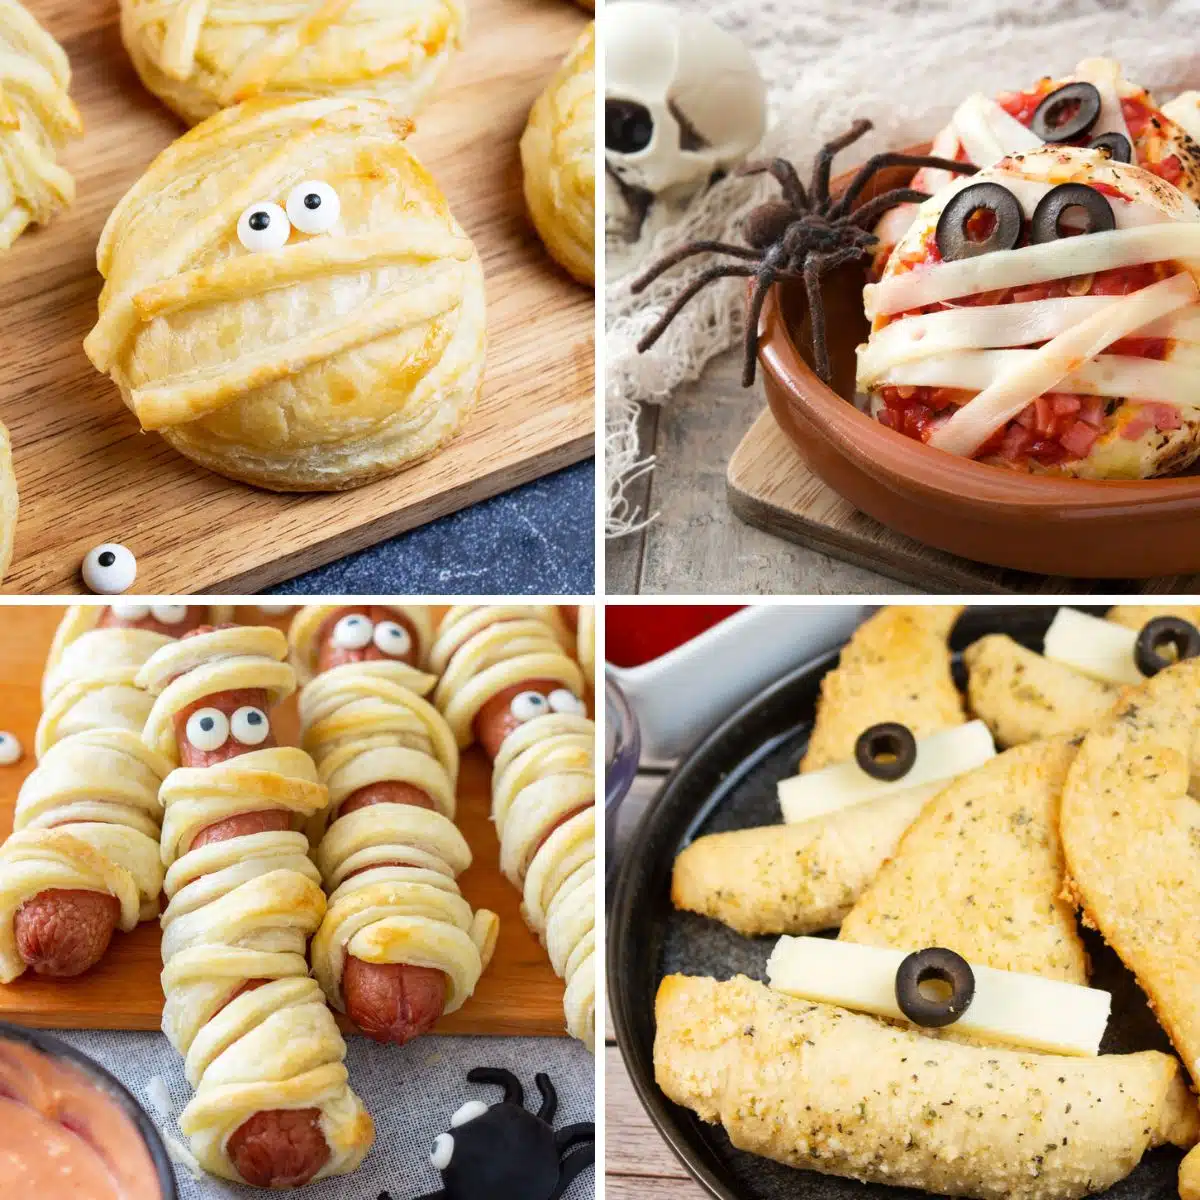 Best Halloween appetizers to make for parties featuring 4 images of easy treats and snacks in a collage.